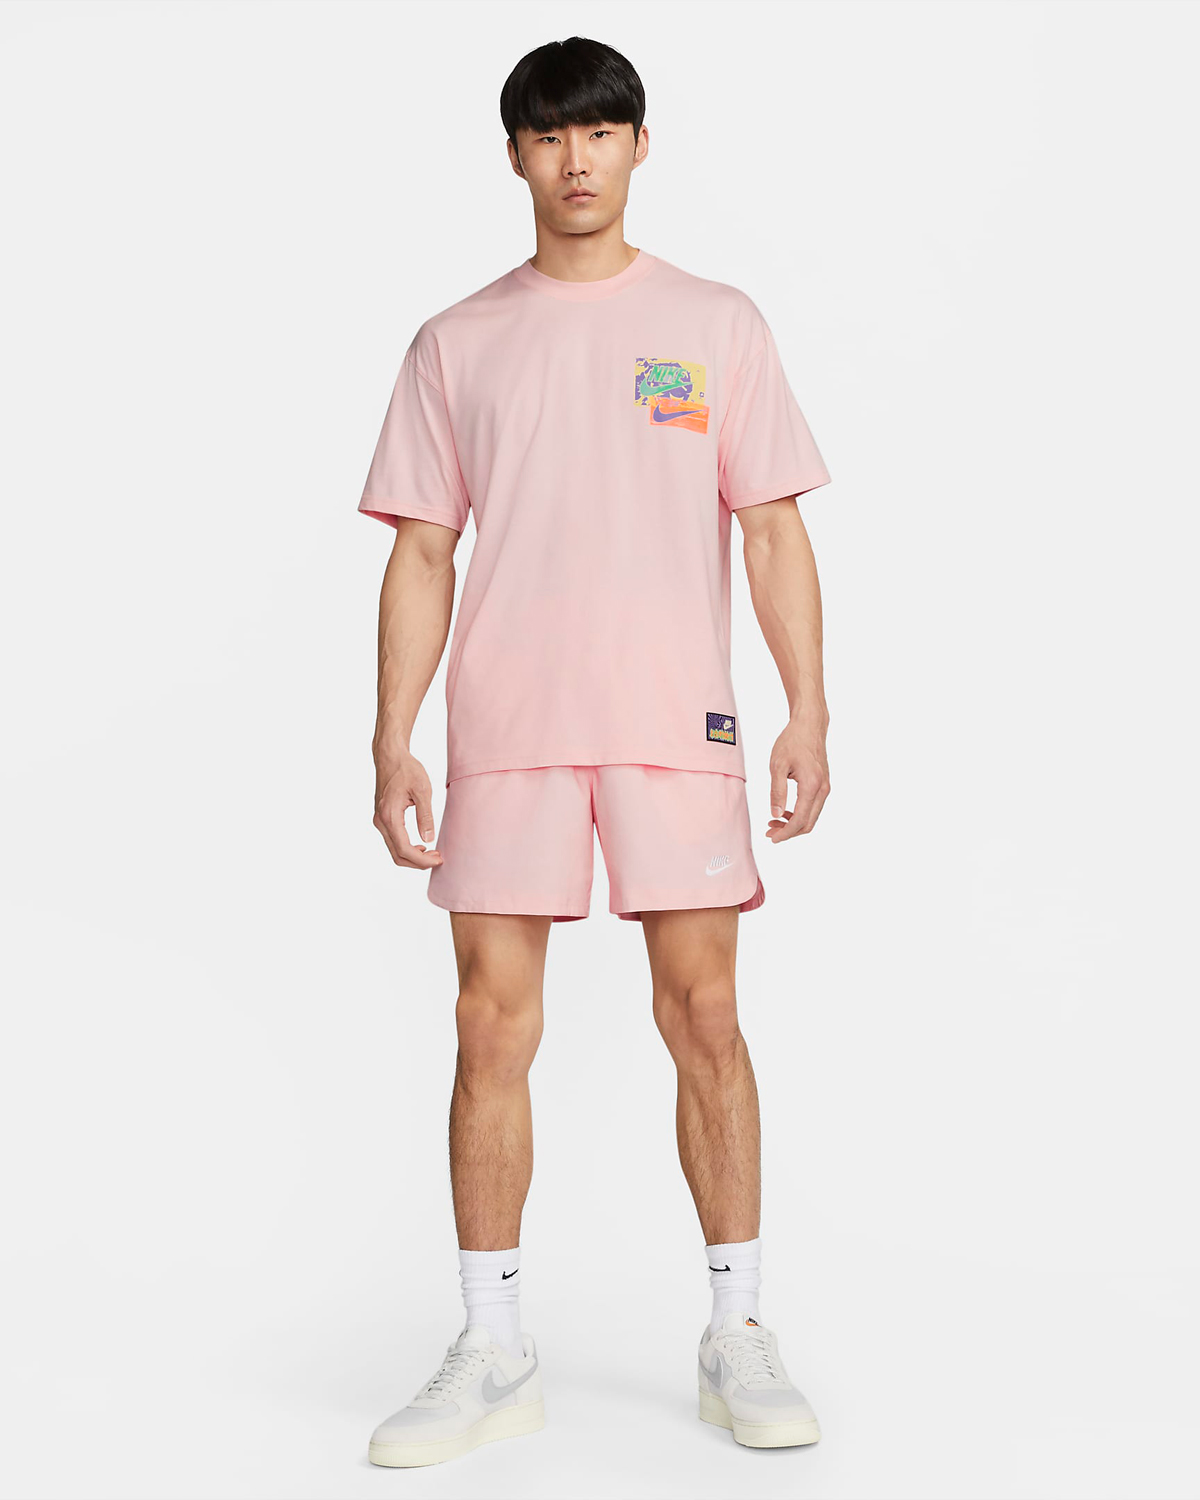 Nike-Sportswear-Max90-T-Shirt-Pink-Bloom-Outfit